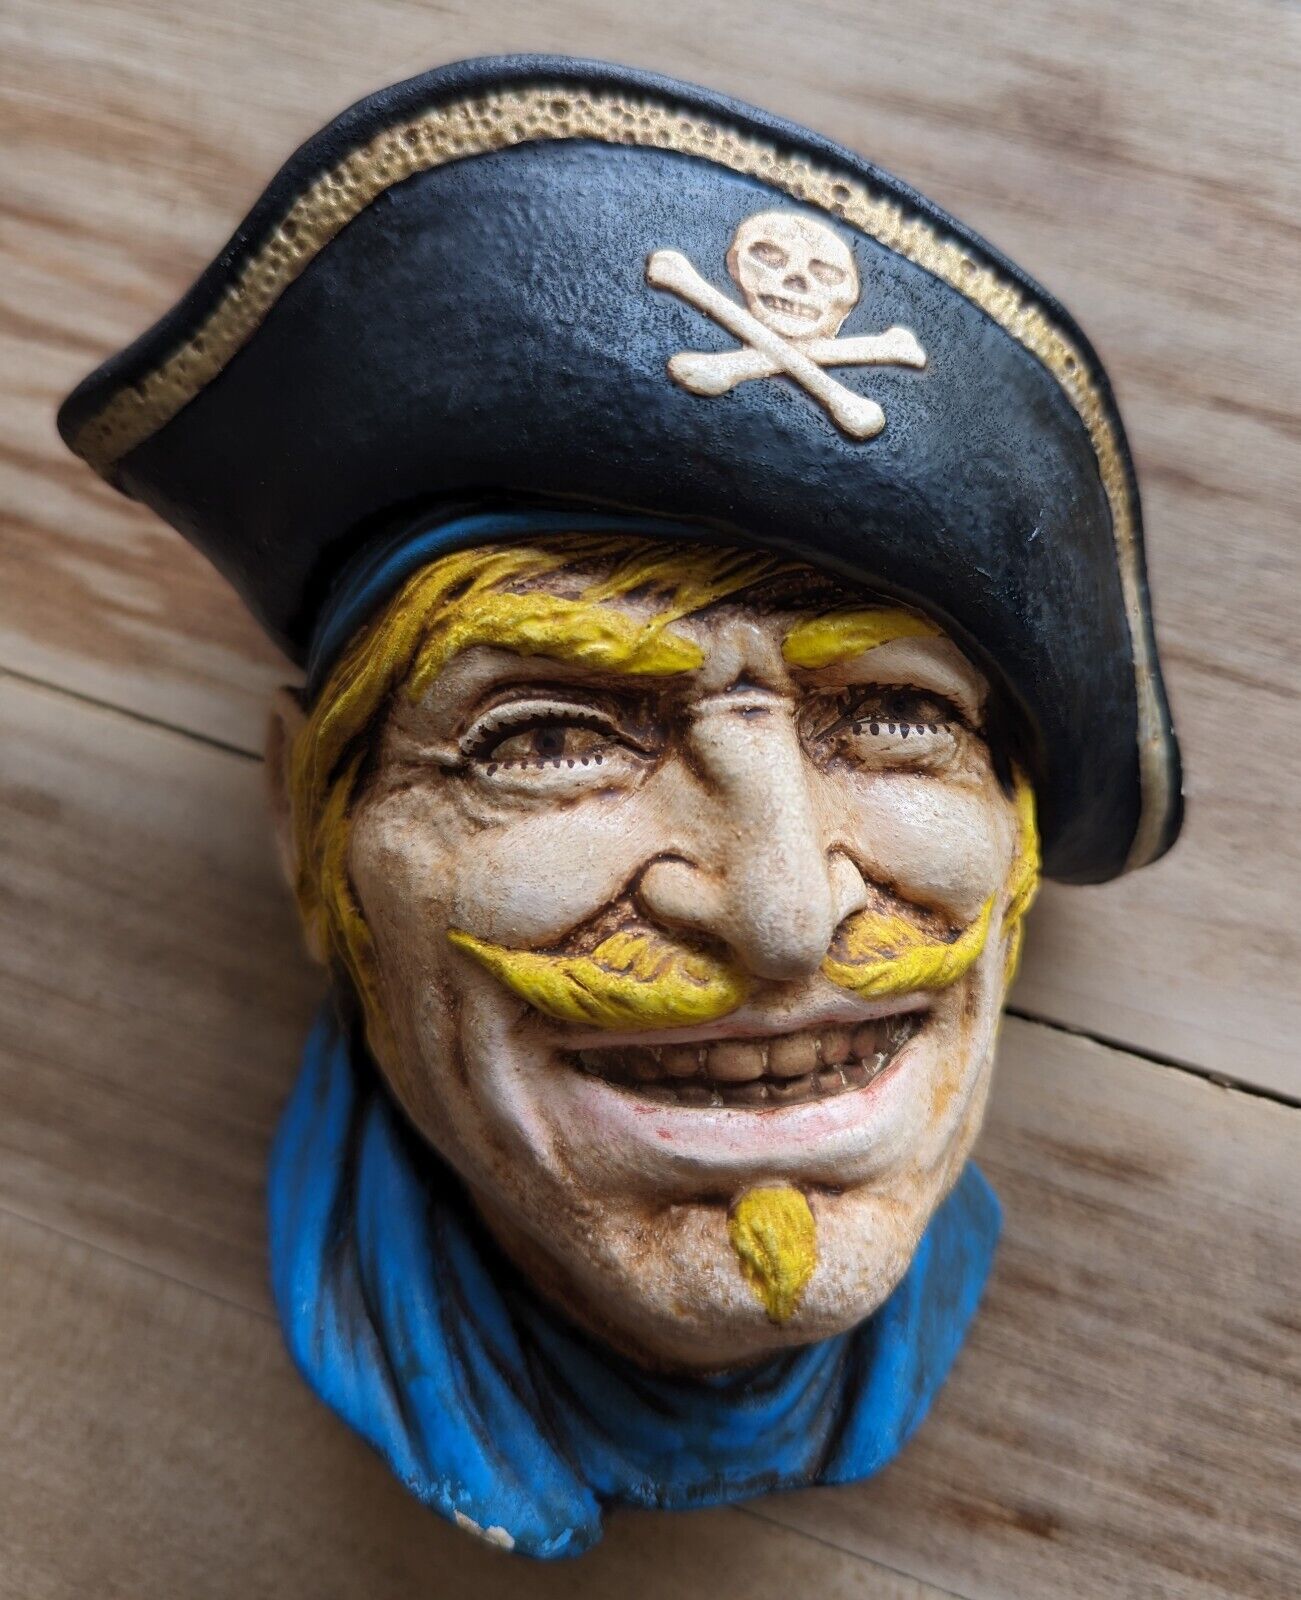 Bossons Head Chalkware Vintage VTG “Captain“ Hand-painted Collectible Blue Hang